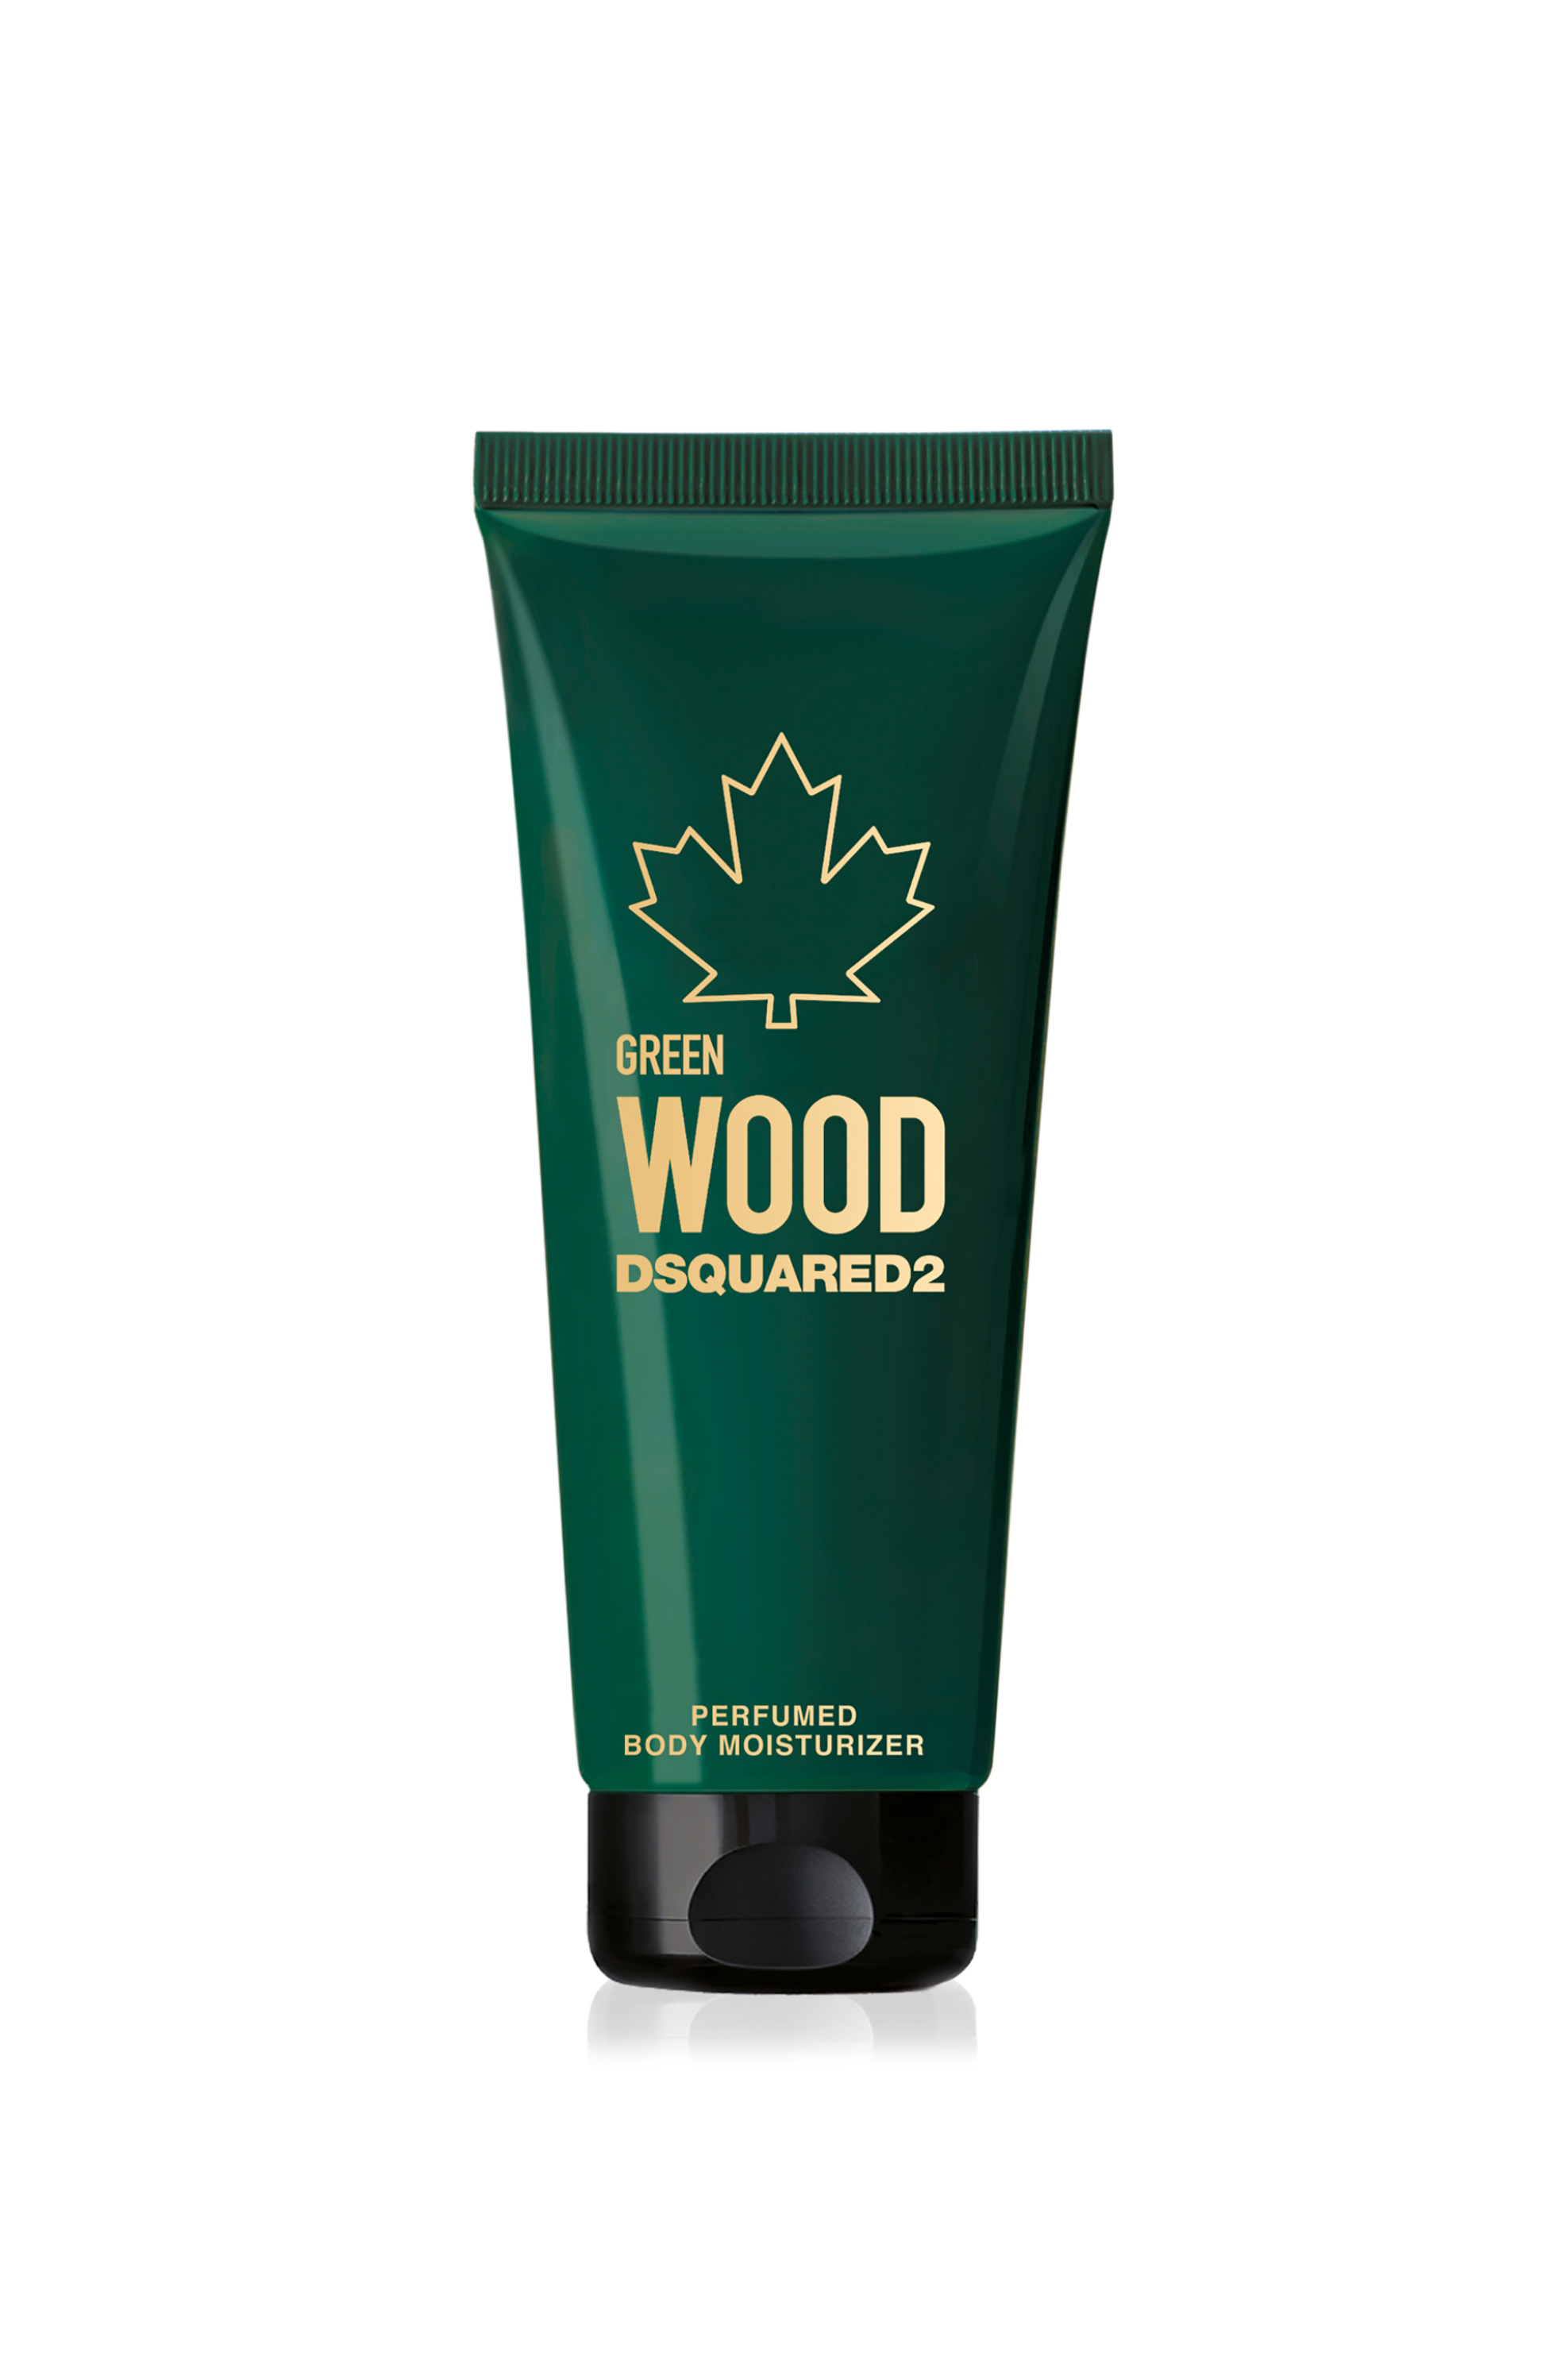 Dsquared2 Wood Green Pour Homme Perfumed Body Moisturizer Tube 200 ml - 5D50 1054878